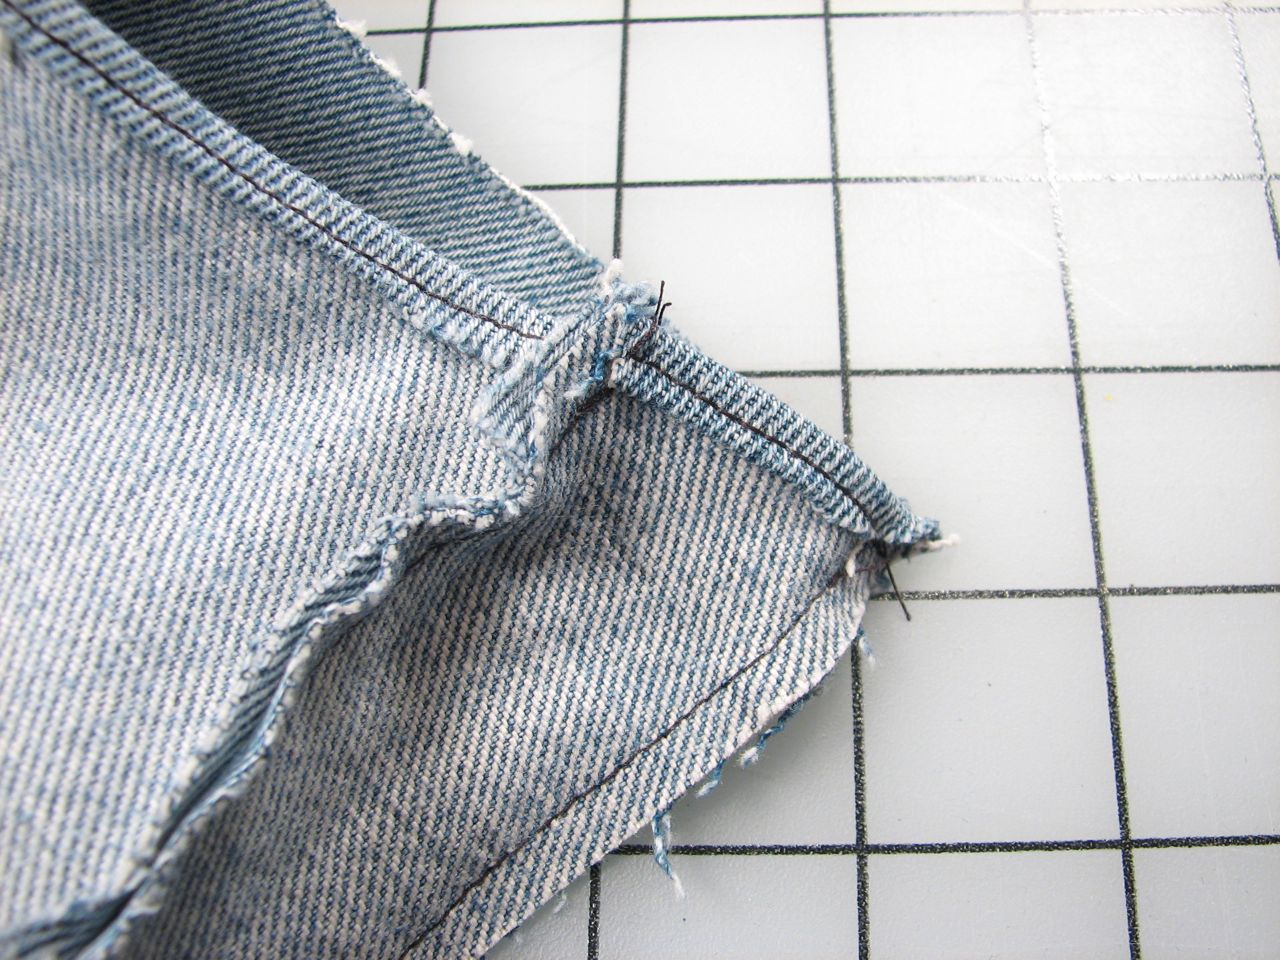 Denim Insulation: Another Way Jeans Can Keep You Warm - Levi